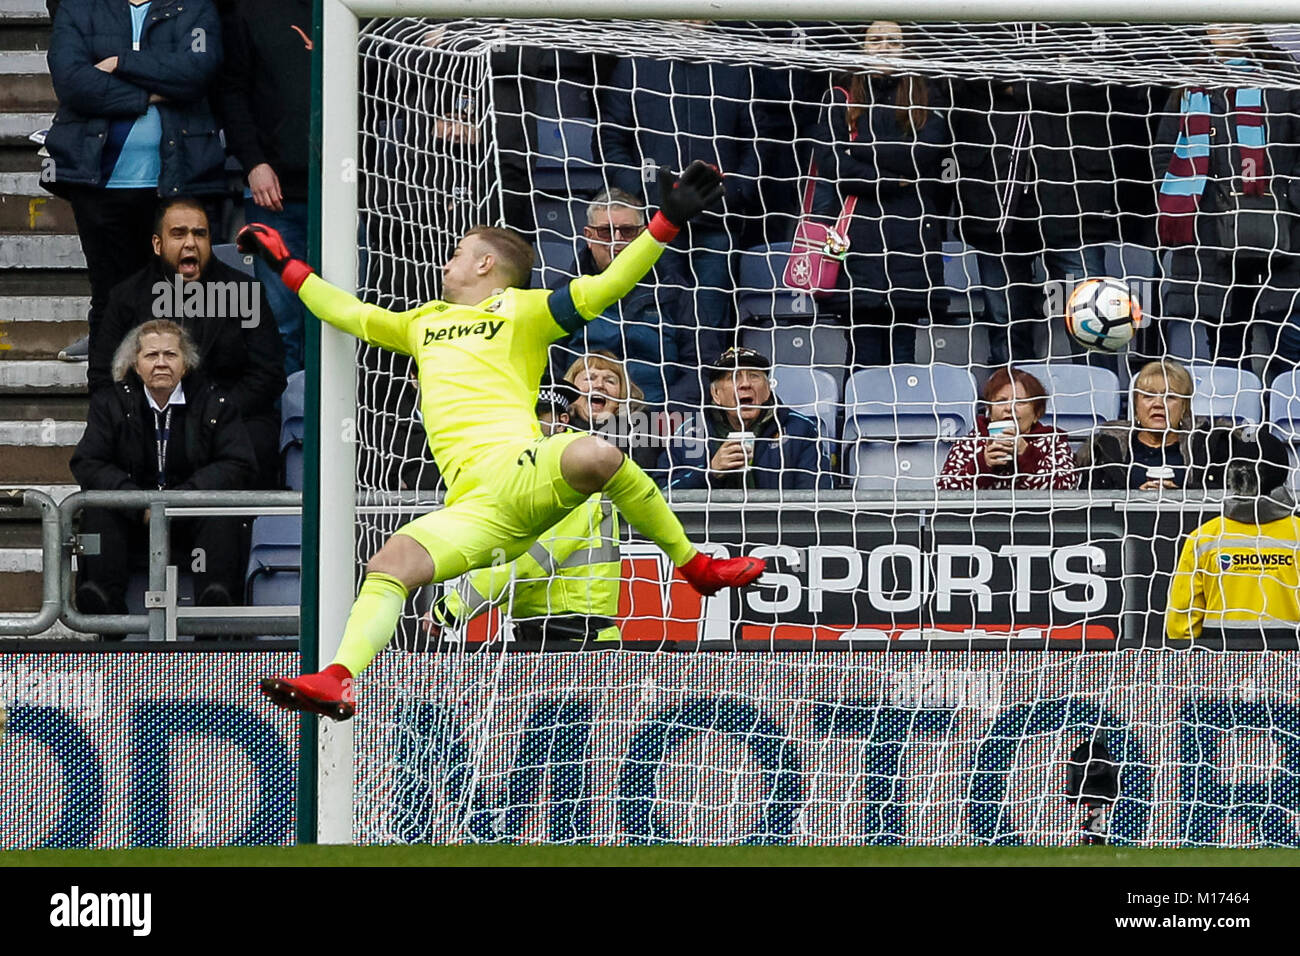 Wigan, England. 27th January, 2018. Joe Hart of West Ham United fails to stop Wigan's first goal to make the score 1-0 during the FA Cup Fourth Round match between Wigan Athletic and West Ham United at DW Stadium on January 27th 2018 in Wigan, England. (Photo by Daniel Chesterton/phcimages.com) Credit: PHC Images/Alamy Live News Stock Photo